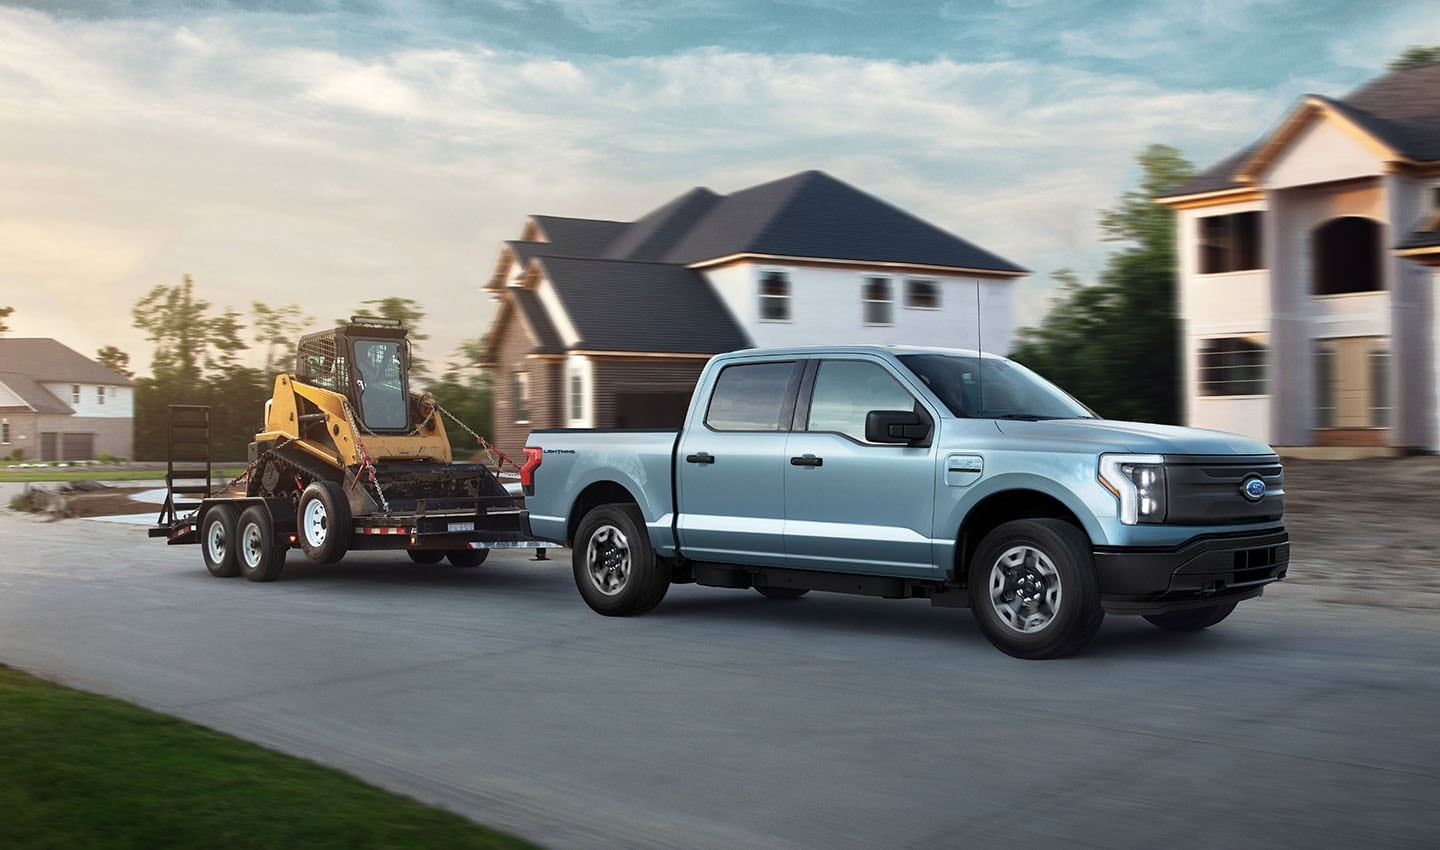 The Ford F150 Lightning is aiming to be an all-electric truck for the hardworking masses. Of all the EVs available today, it has the biggest of names to live up to.